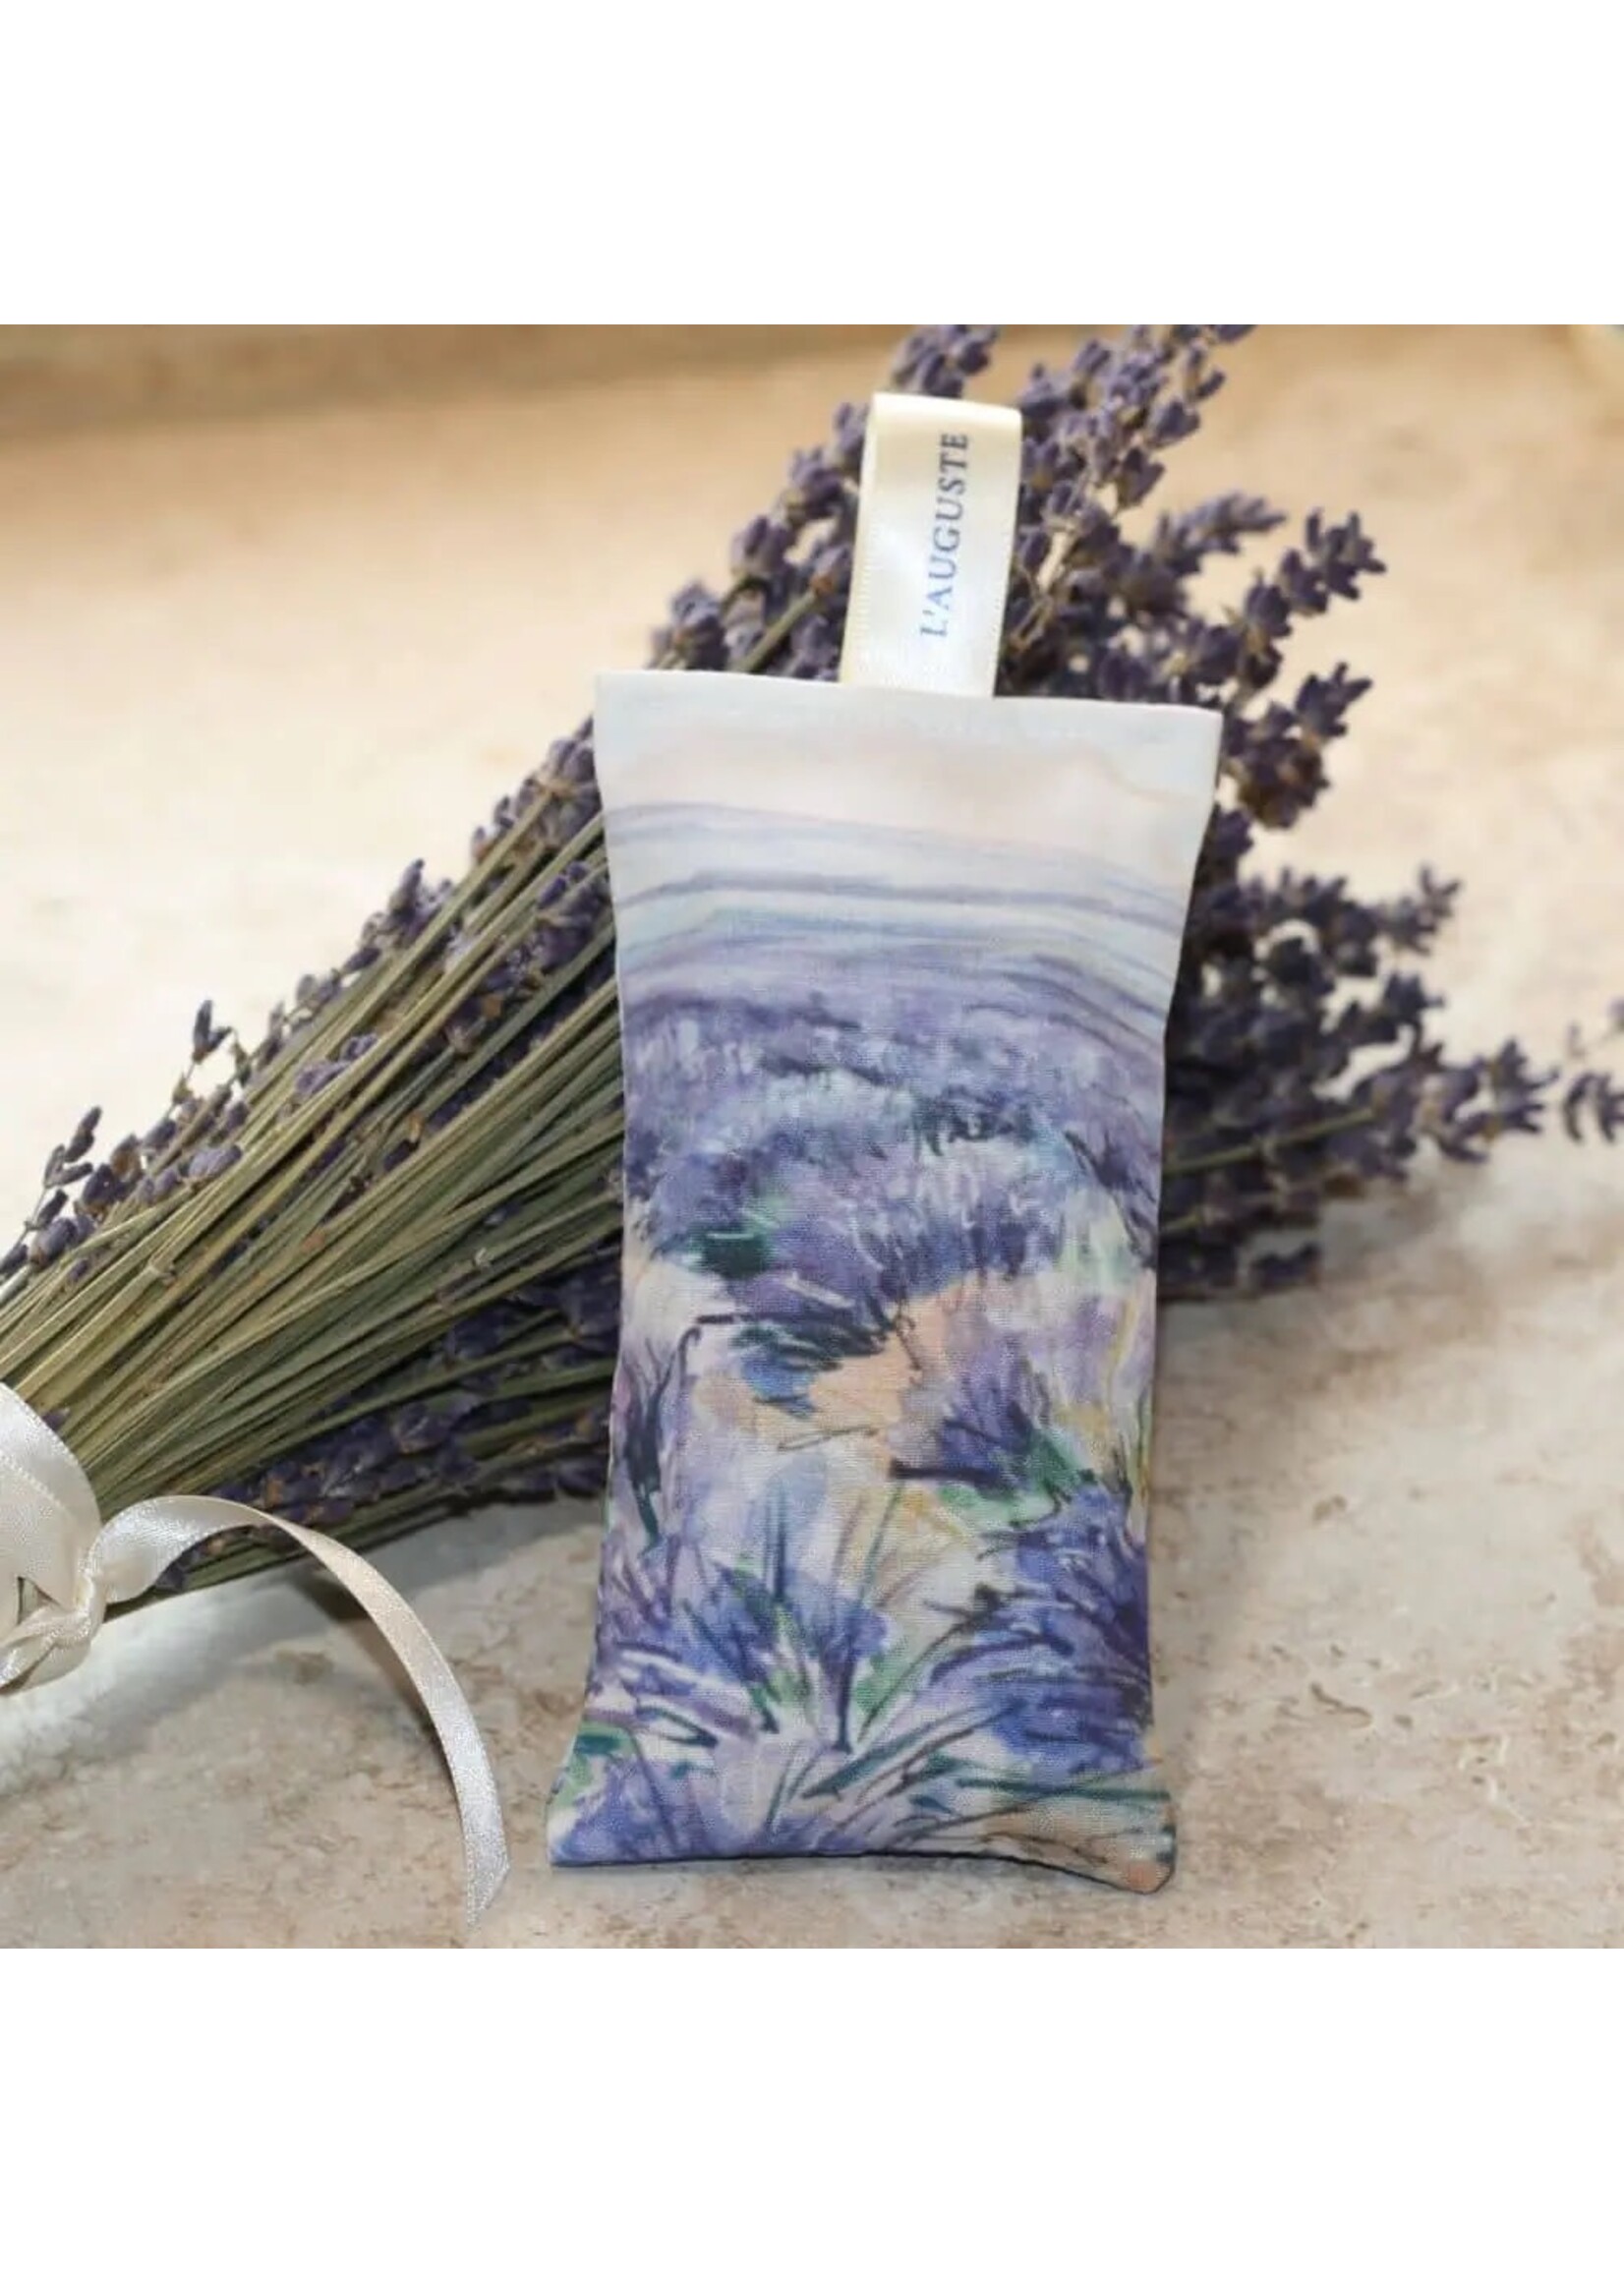 Lavender Sachet from Provence - Field of Lavender